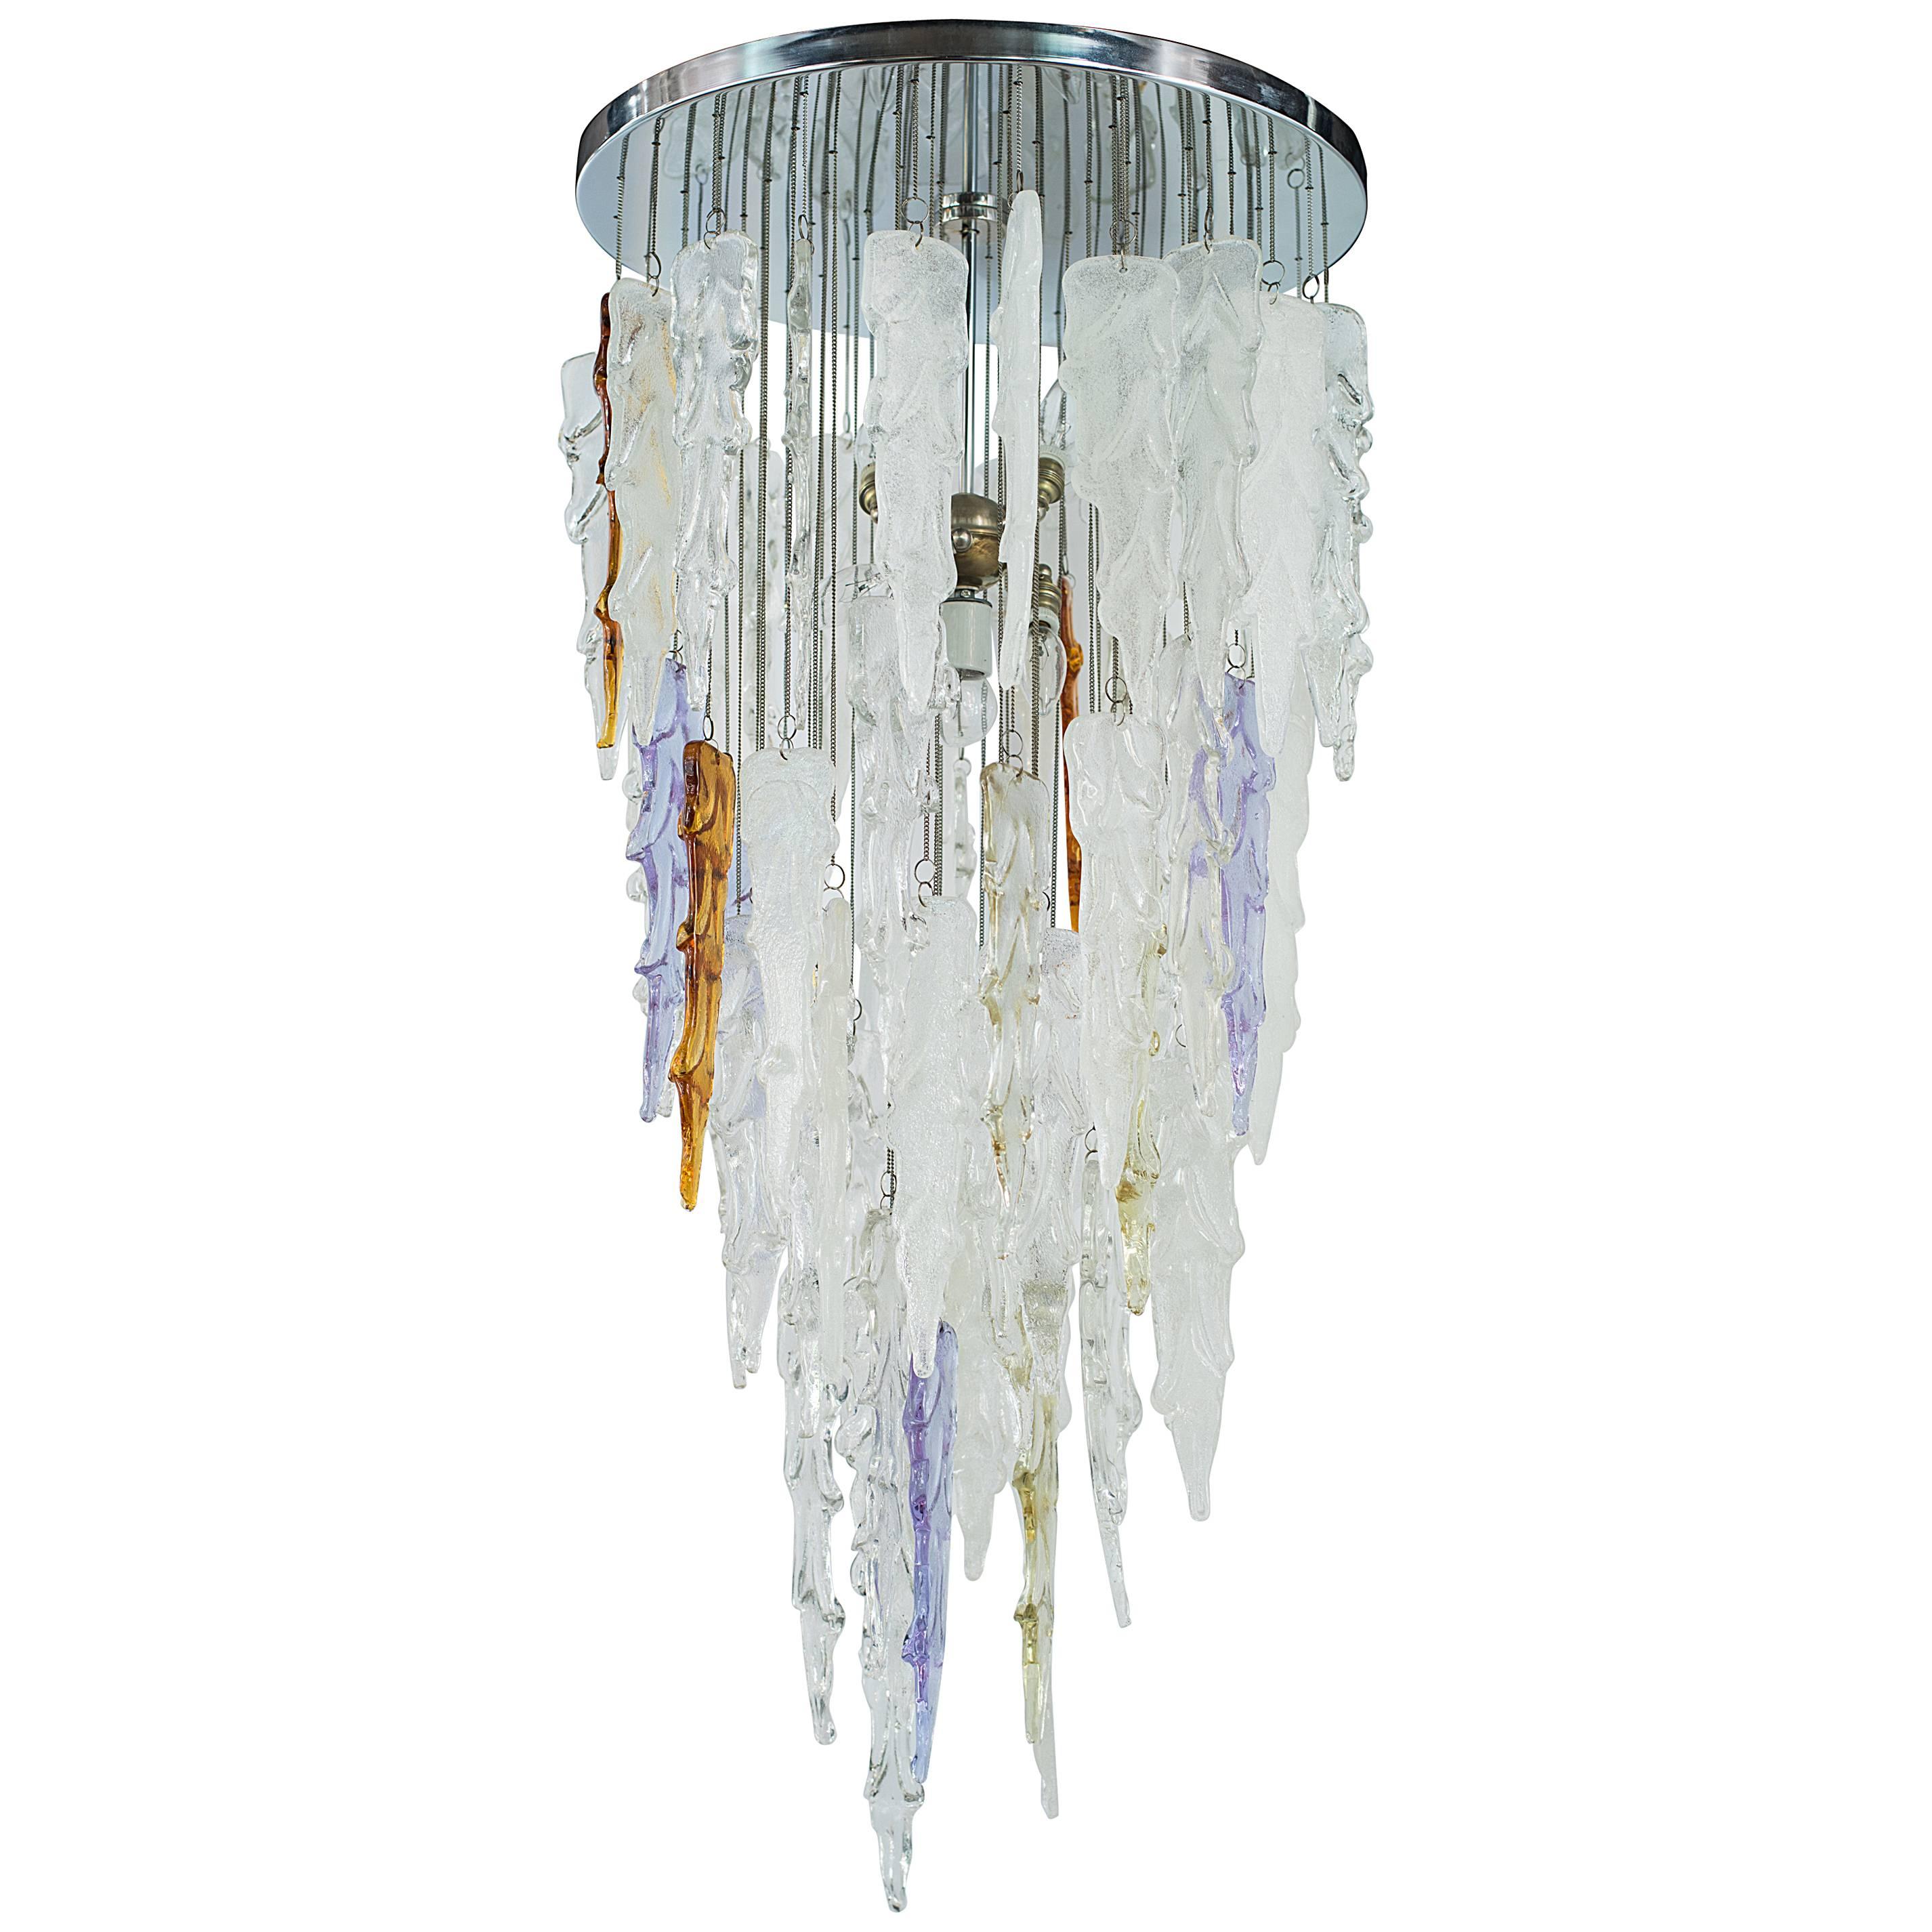 Rare Mid Century Modern Murano Icicle Chandelier by Mazzega